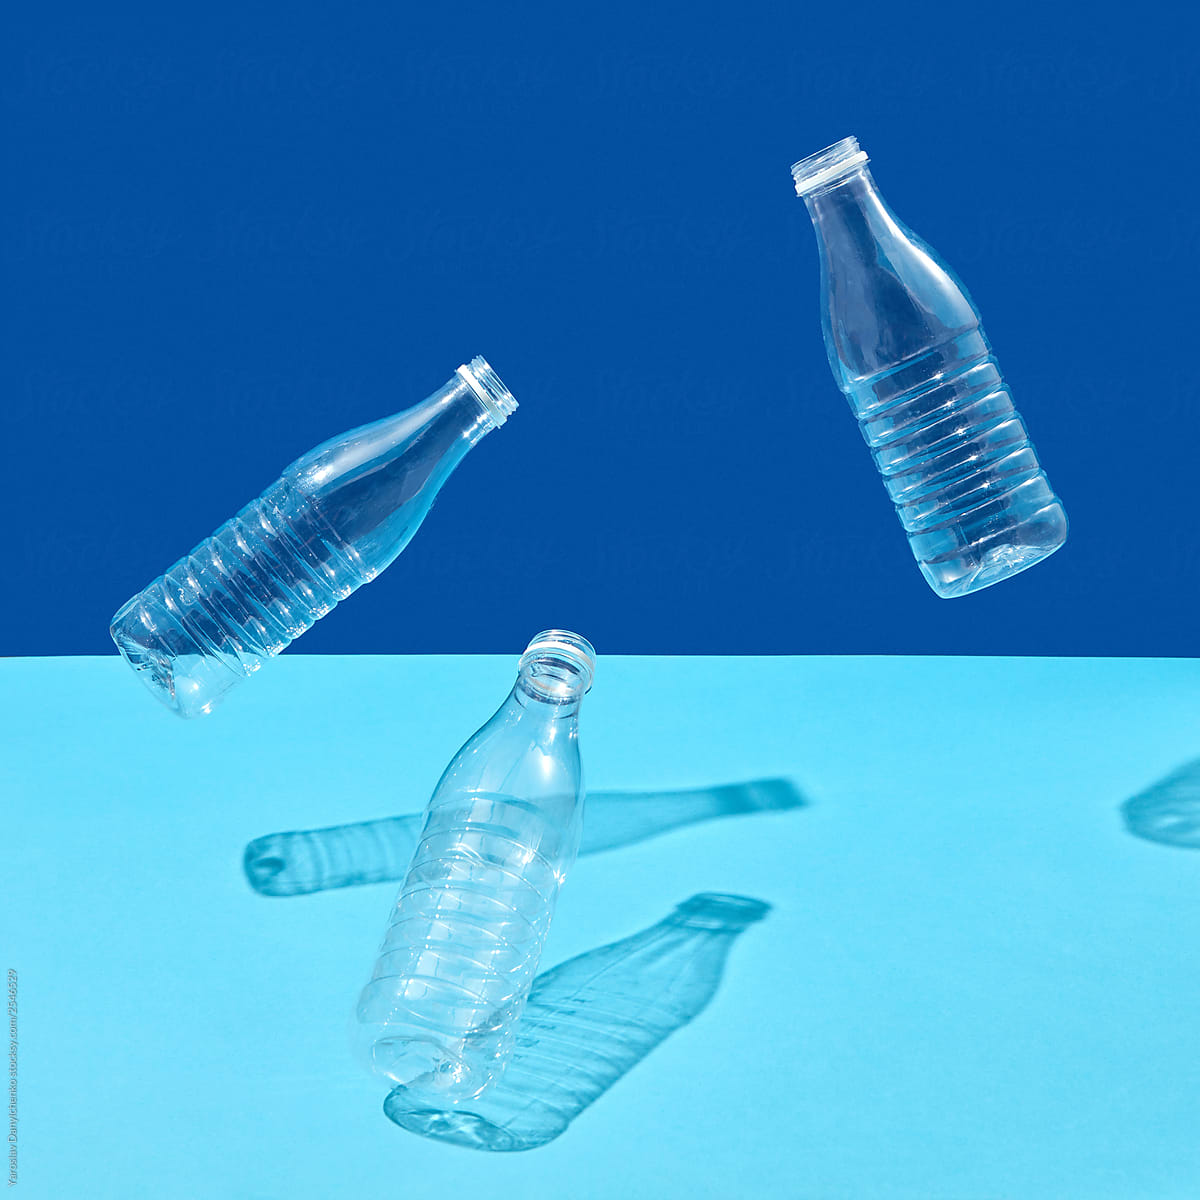 Empty plastic bottles in the air on a duotone blue background